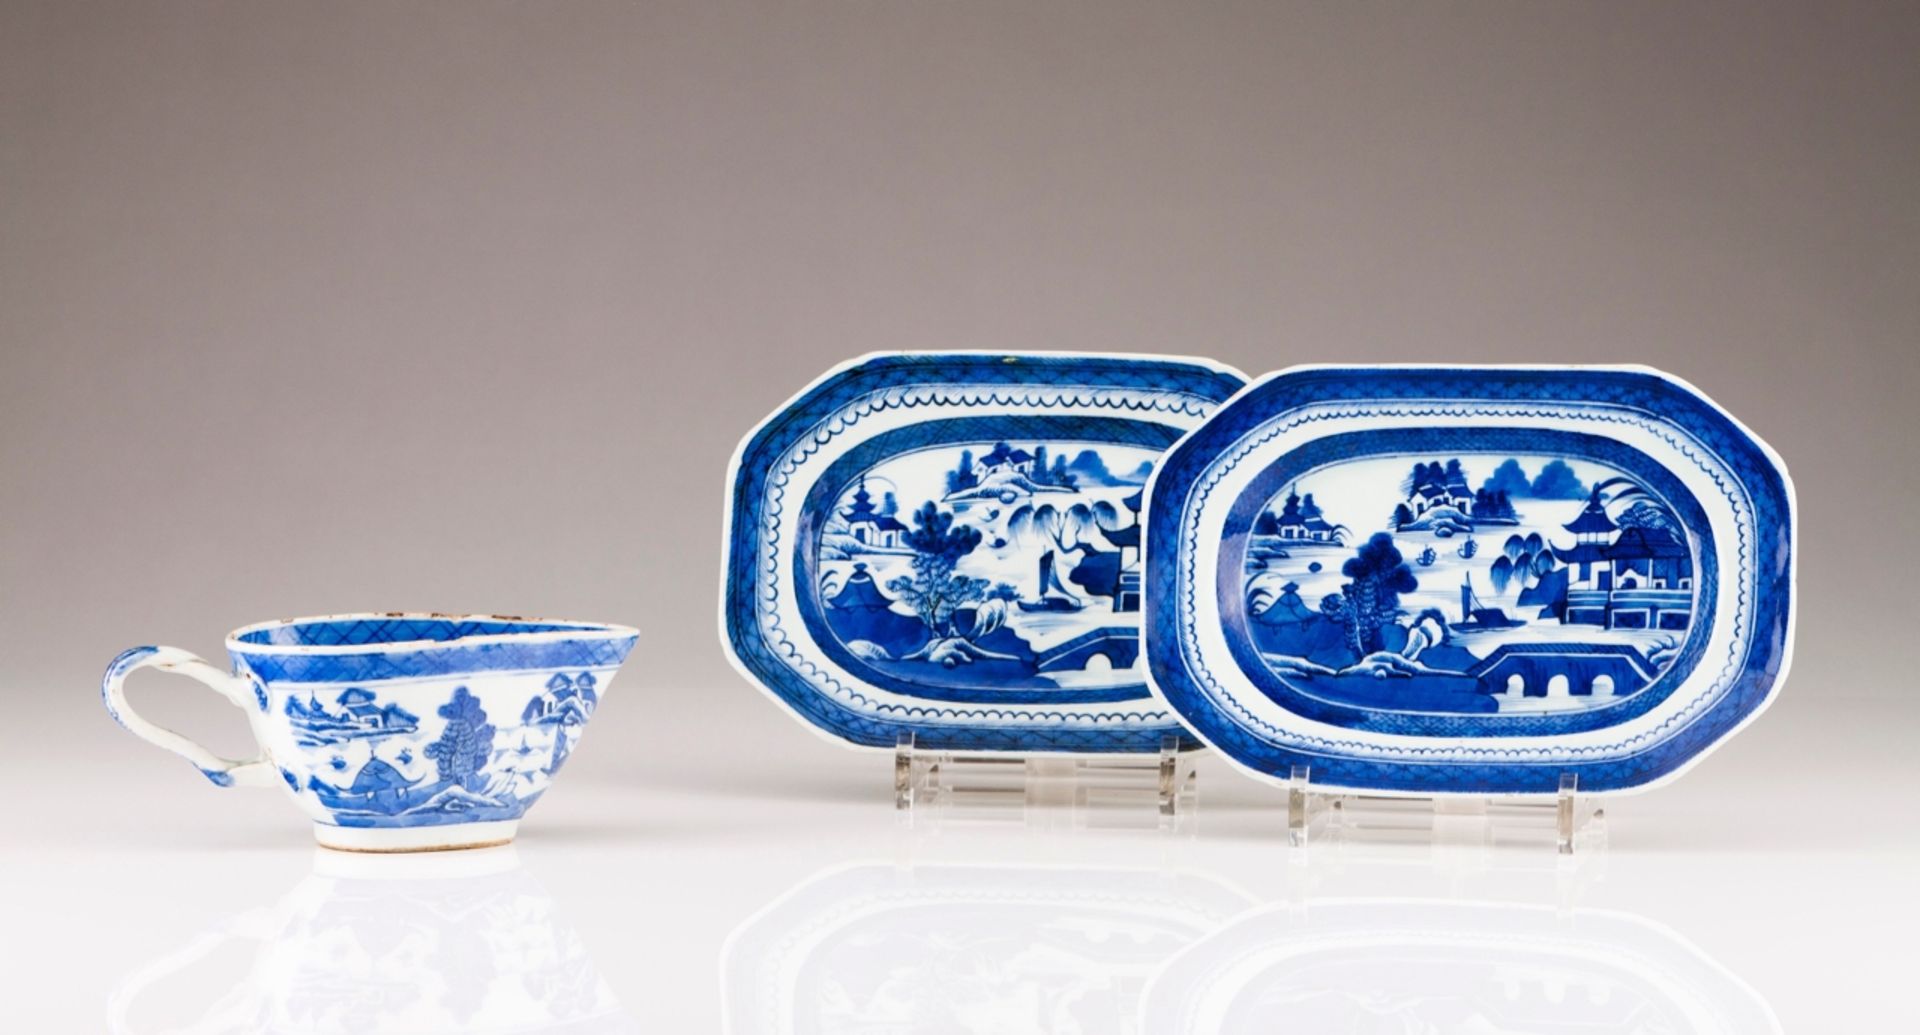 A pair of Jiaqing octagonal dishes
Chinese export porcelain
Blue decoration depicting riverscape